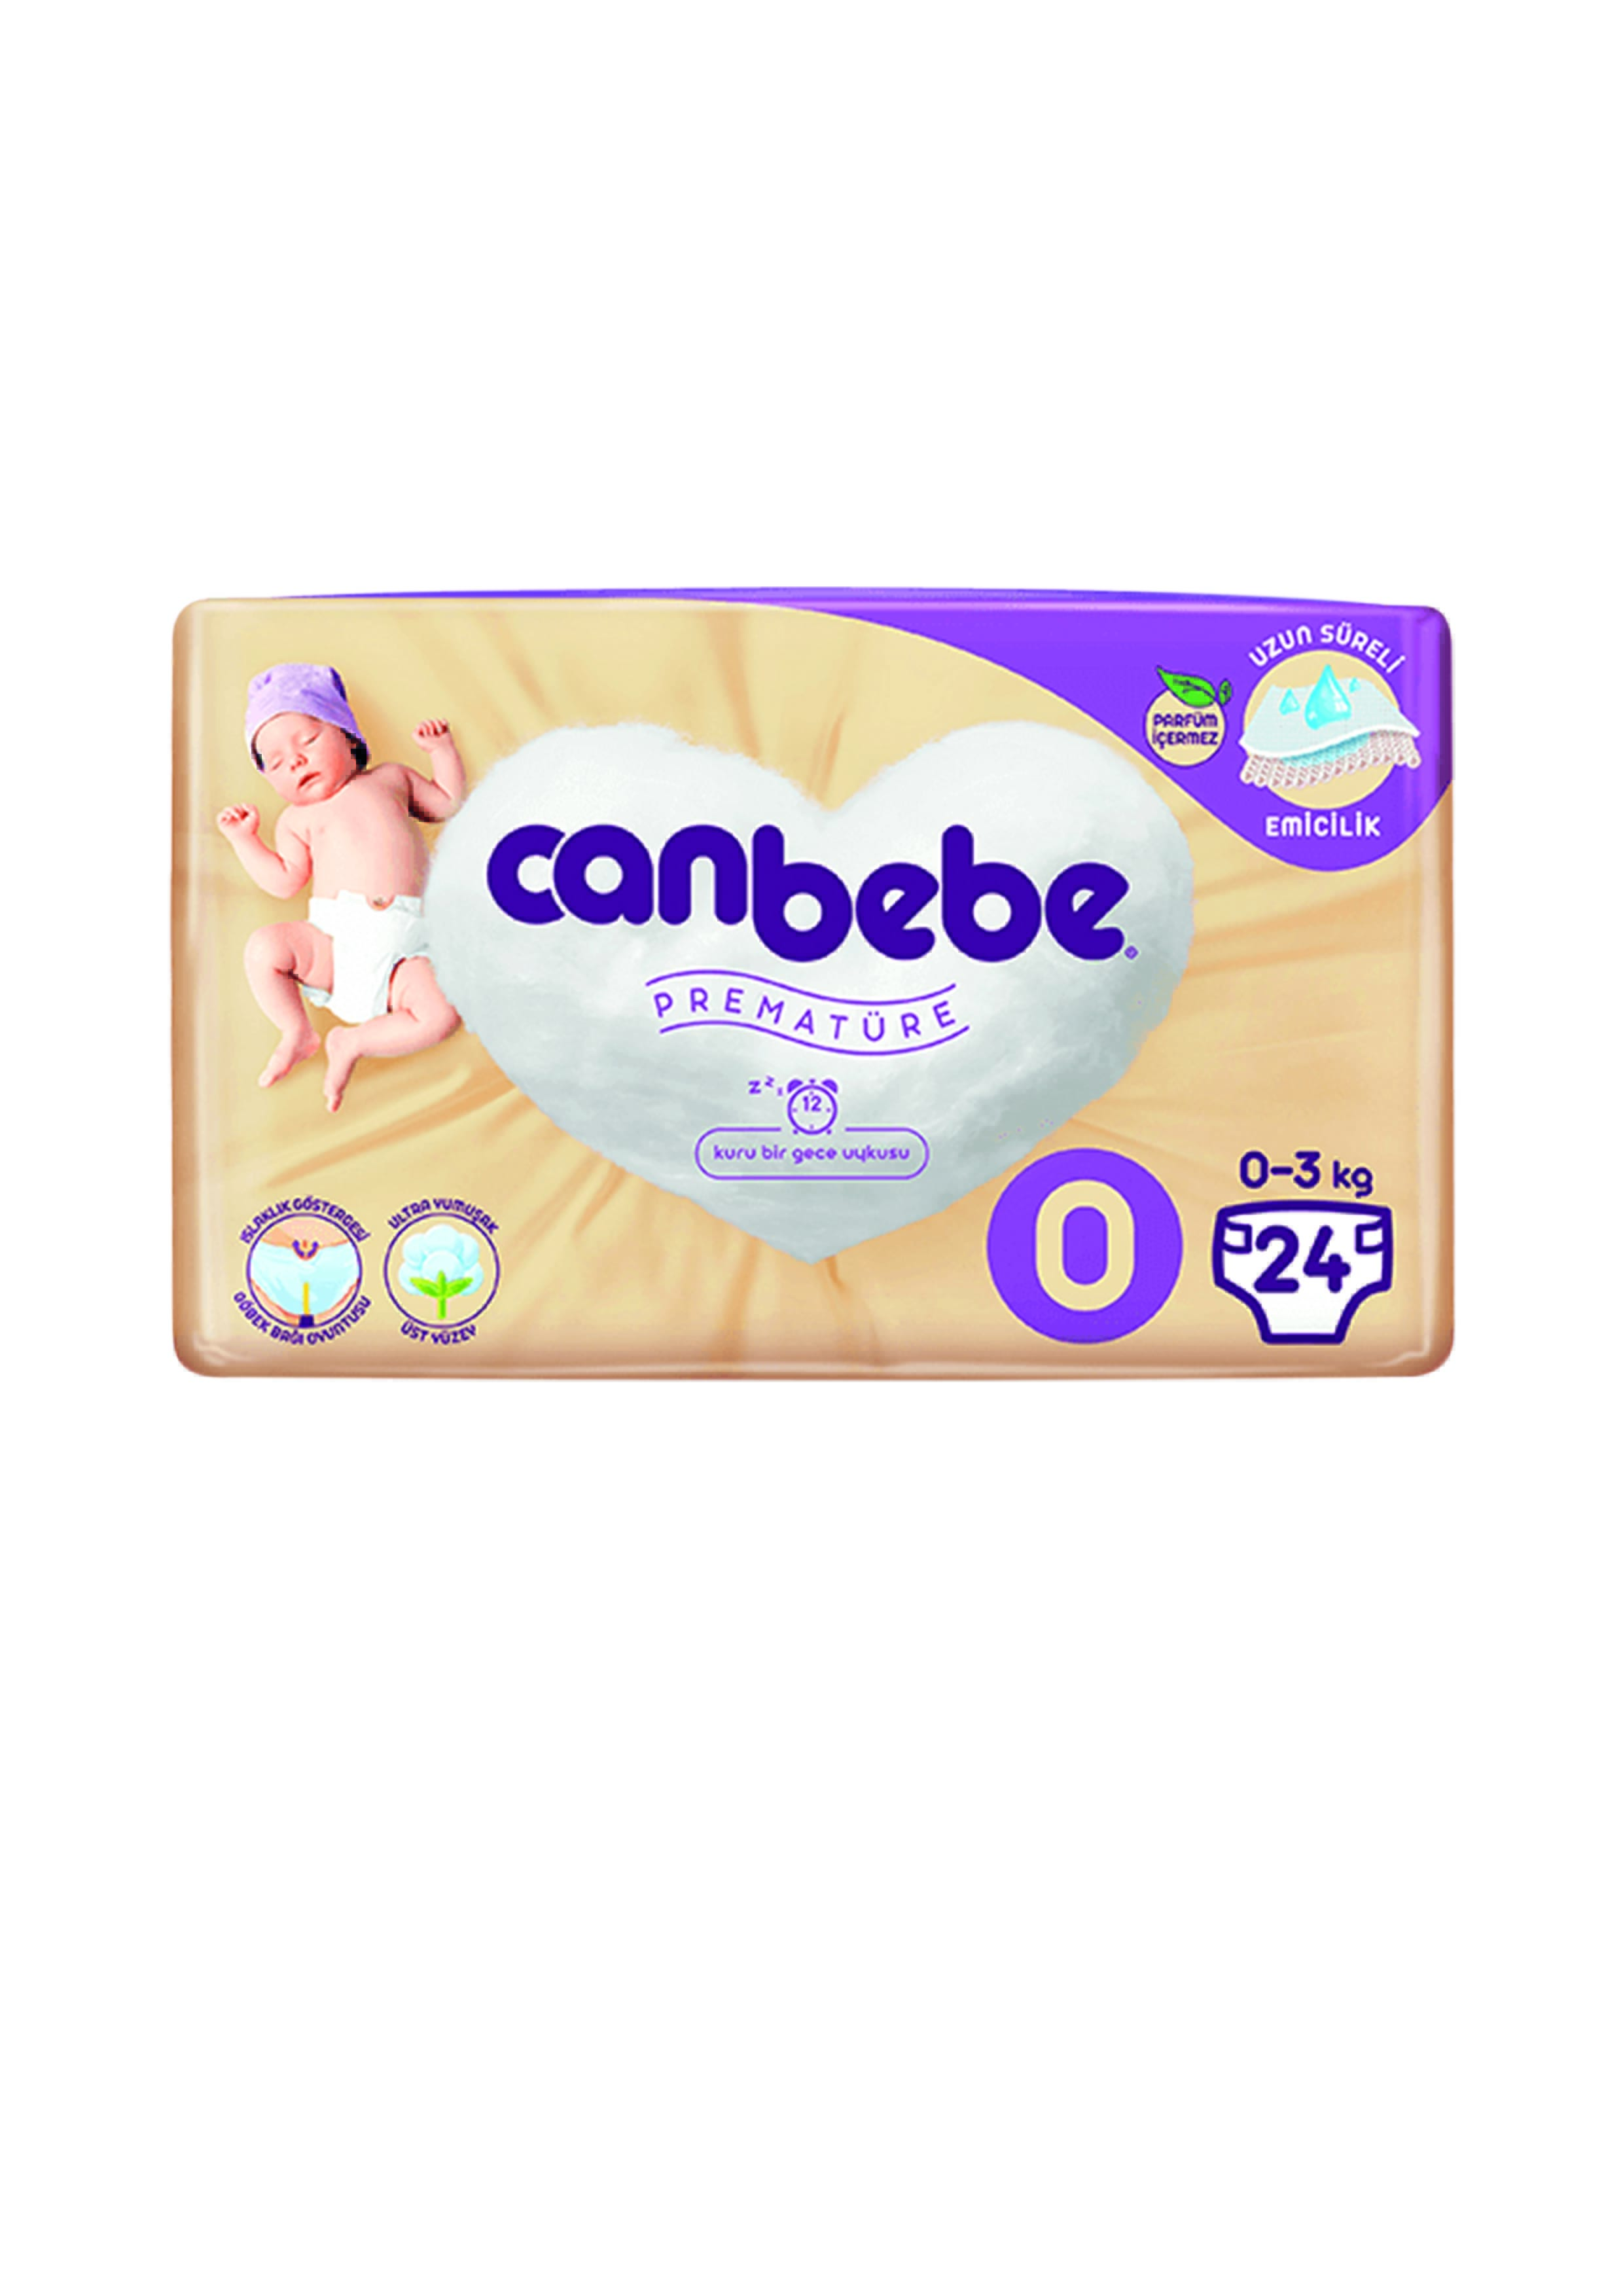 Canbebe Jumbo Package No 0 24 pc 